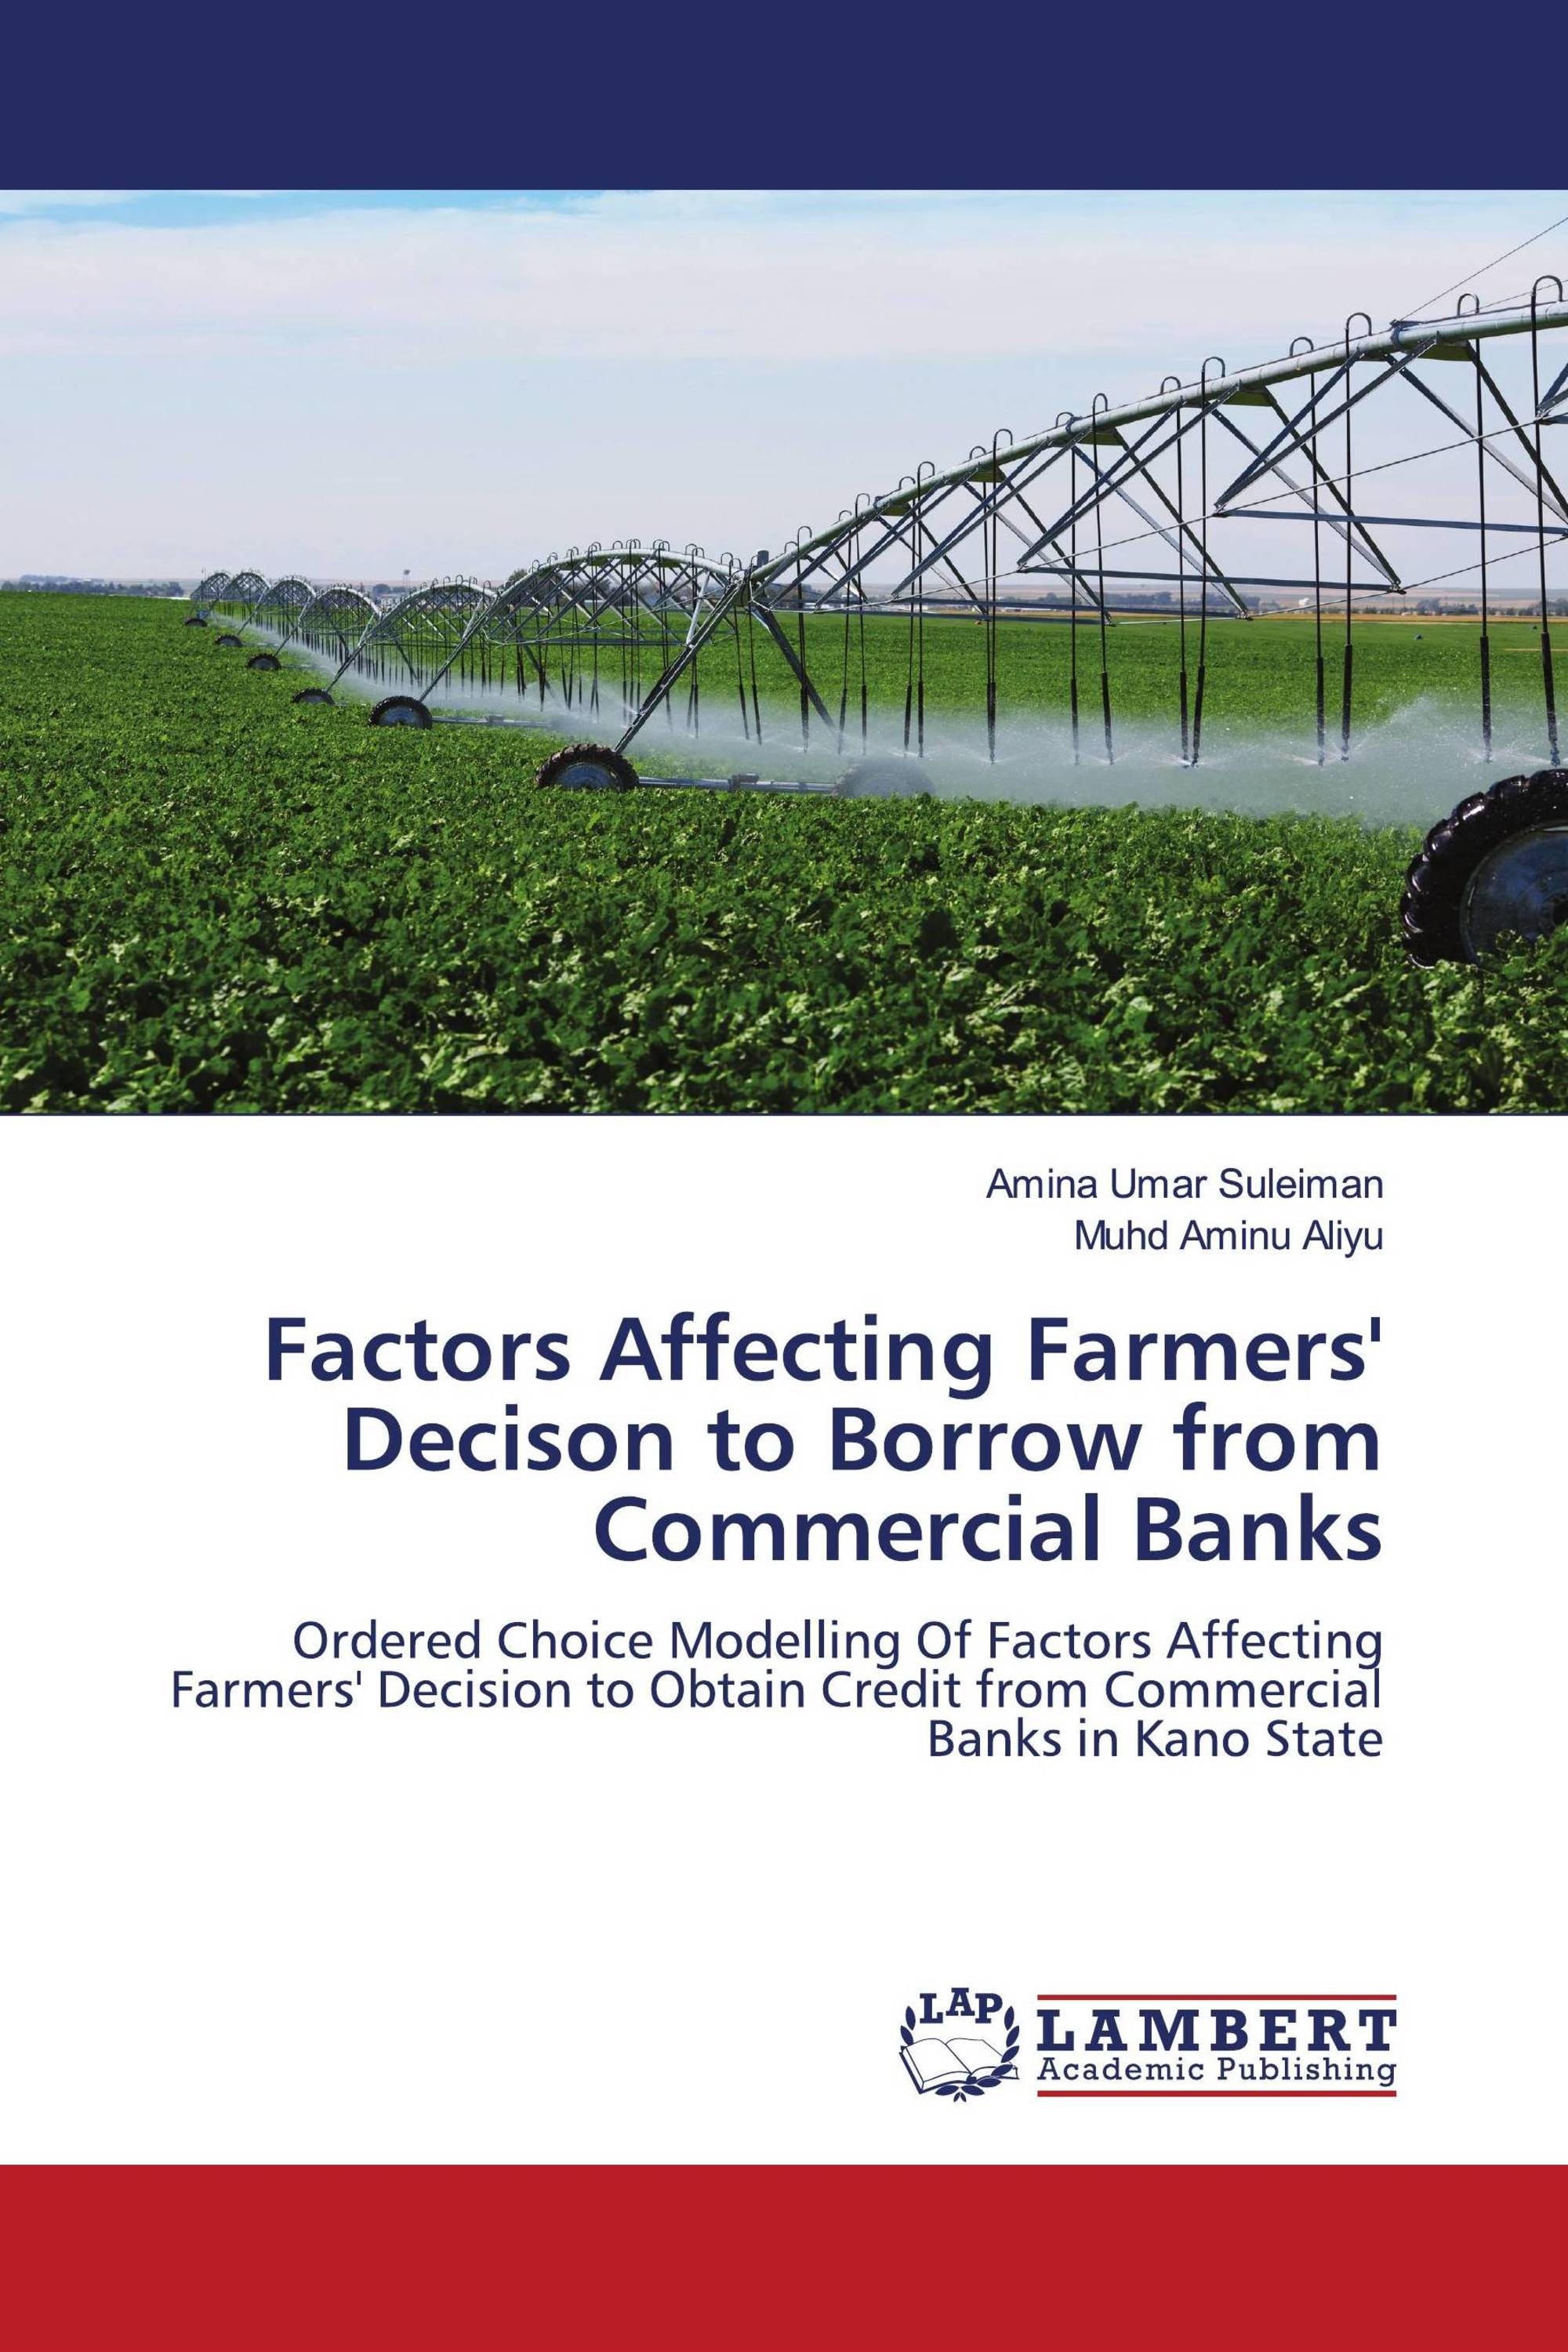 Factors Affecting Farmers' Decison to Borrow from Commercial Banks